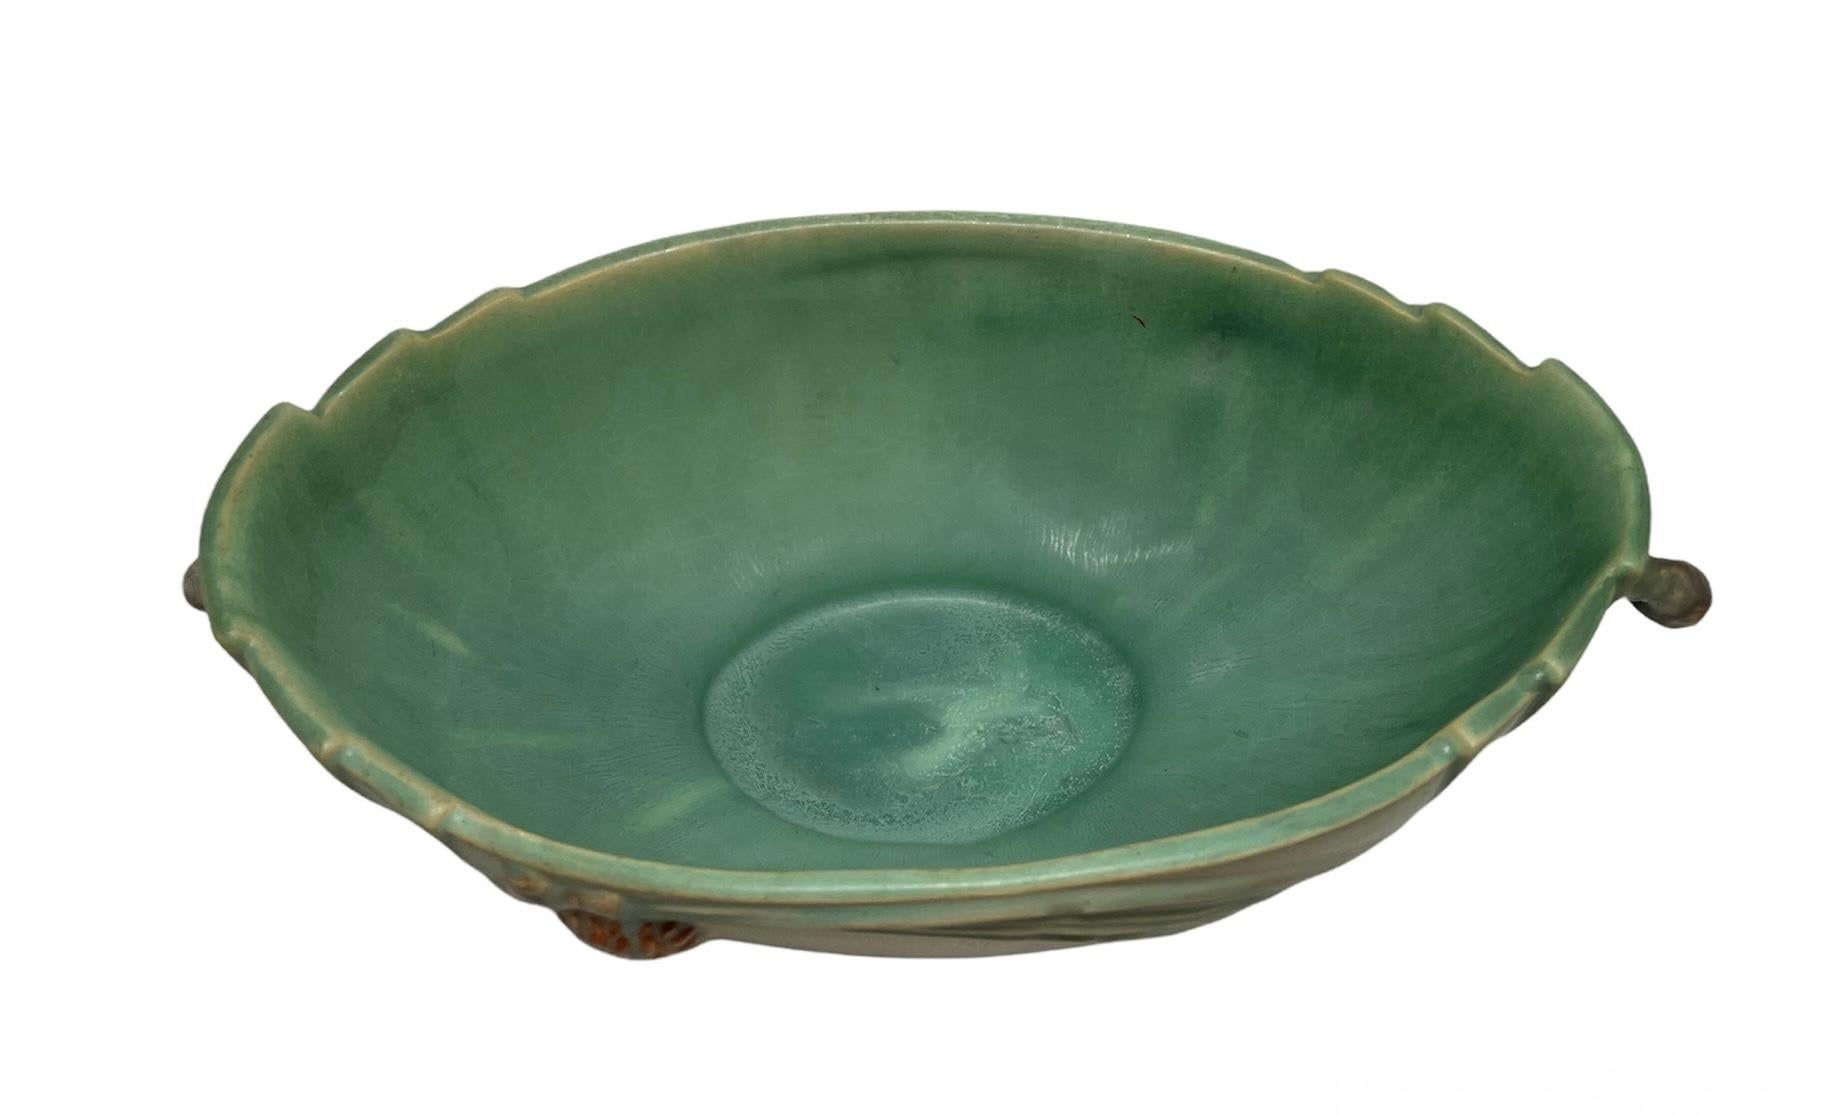 This is a Roseville Art Pottery Pine Cone pattern bowl. The bowl is green and is adorned with a branch of pine cone in the front. Part of the branch made the handles at each side. Also, each side of the bowl is reeded. Below the base is hallmarked